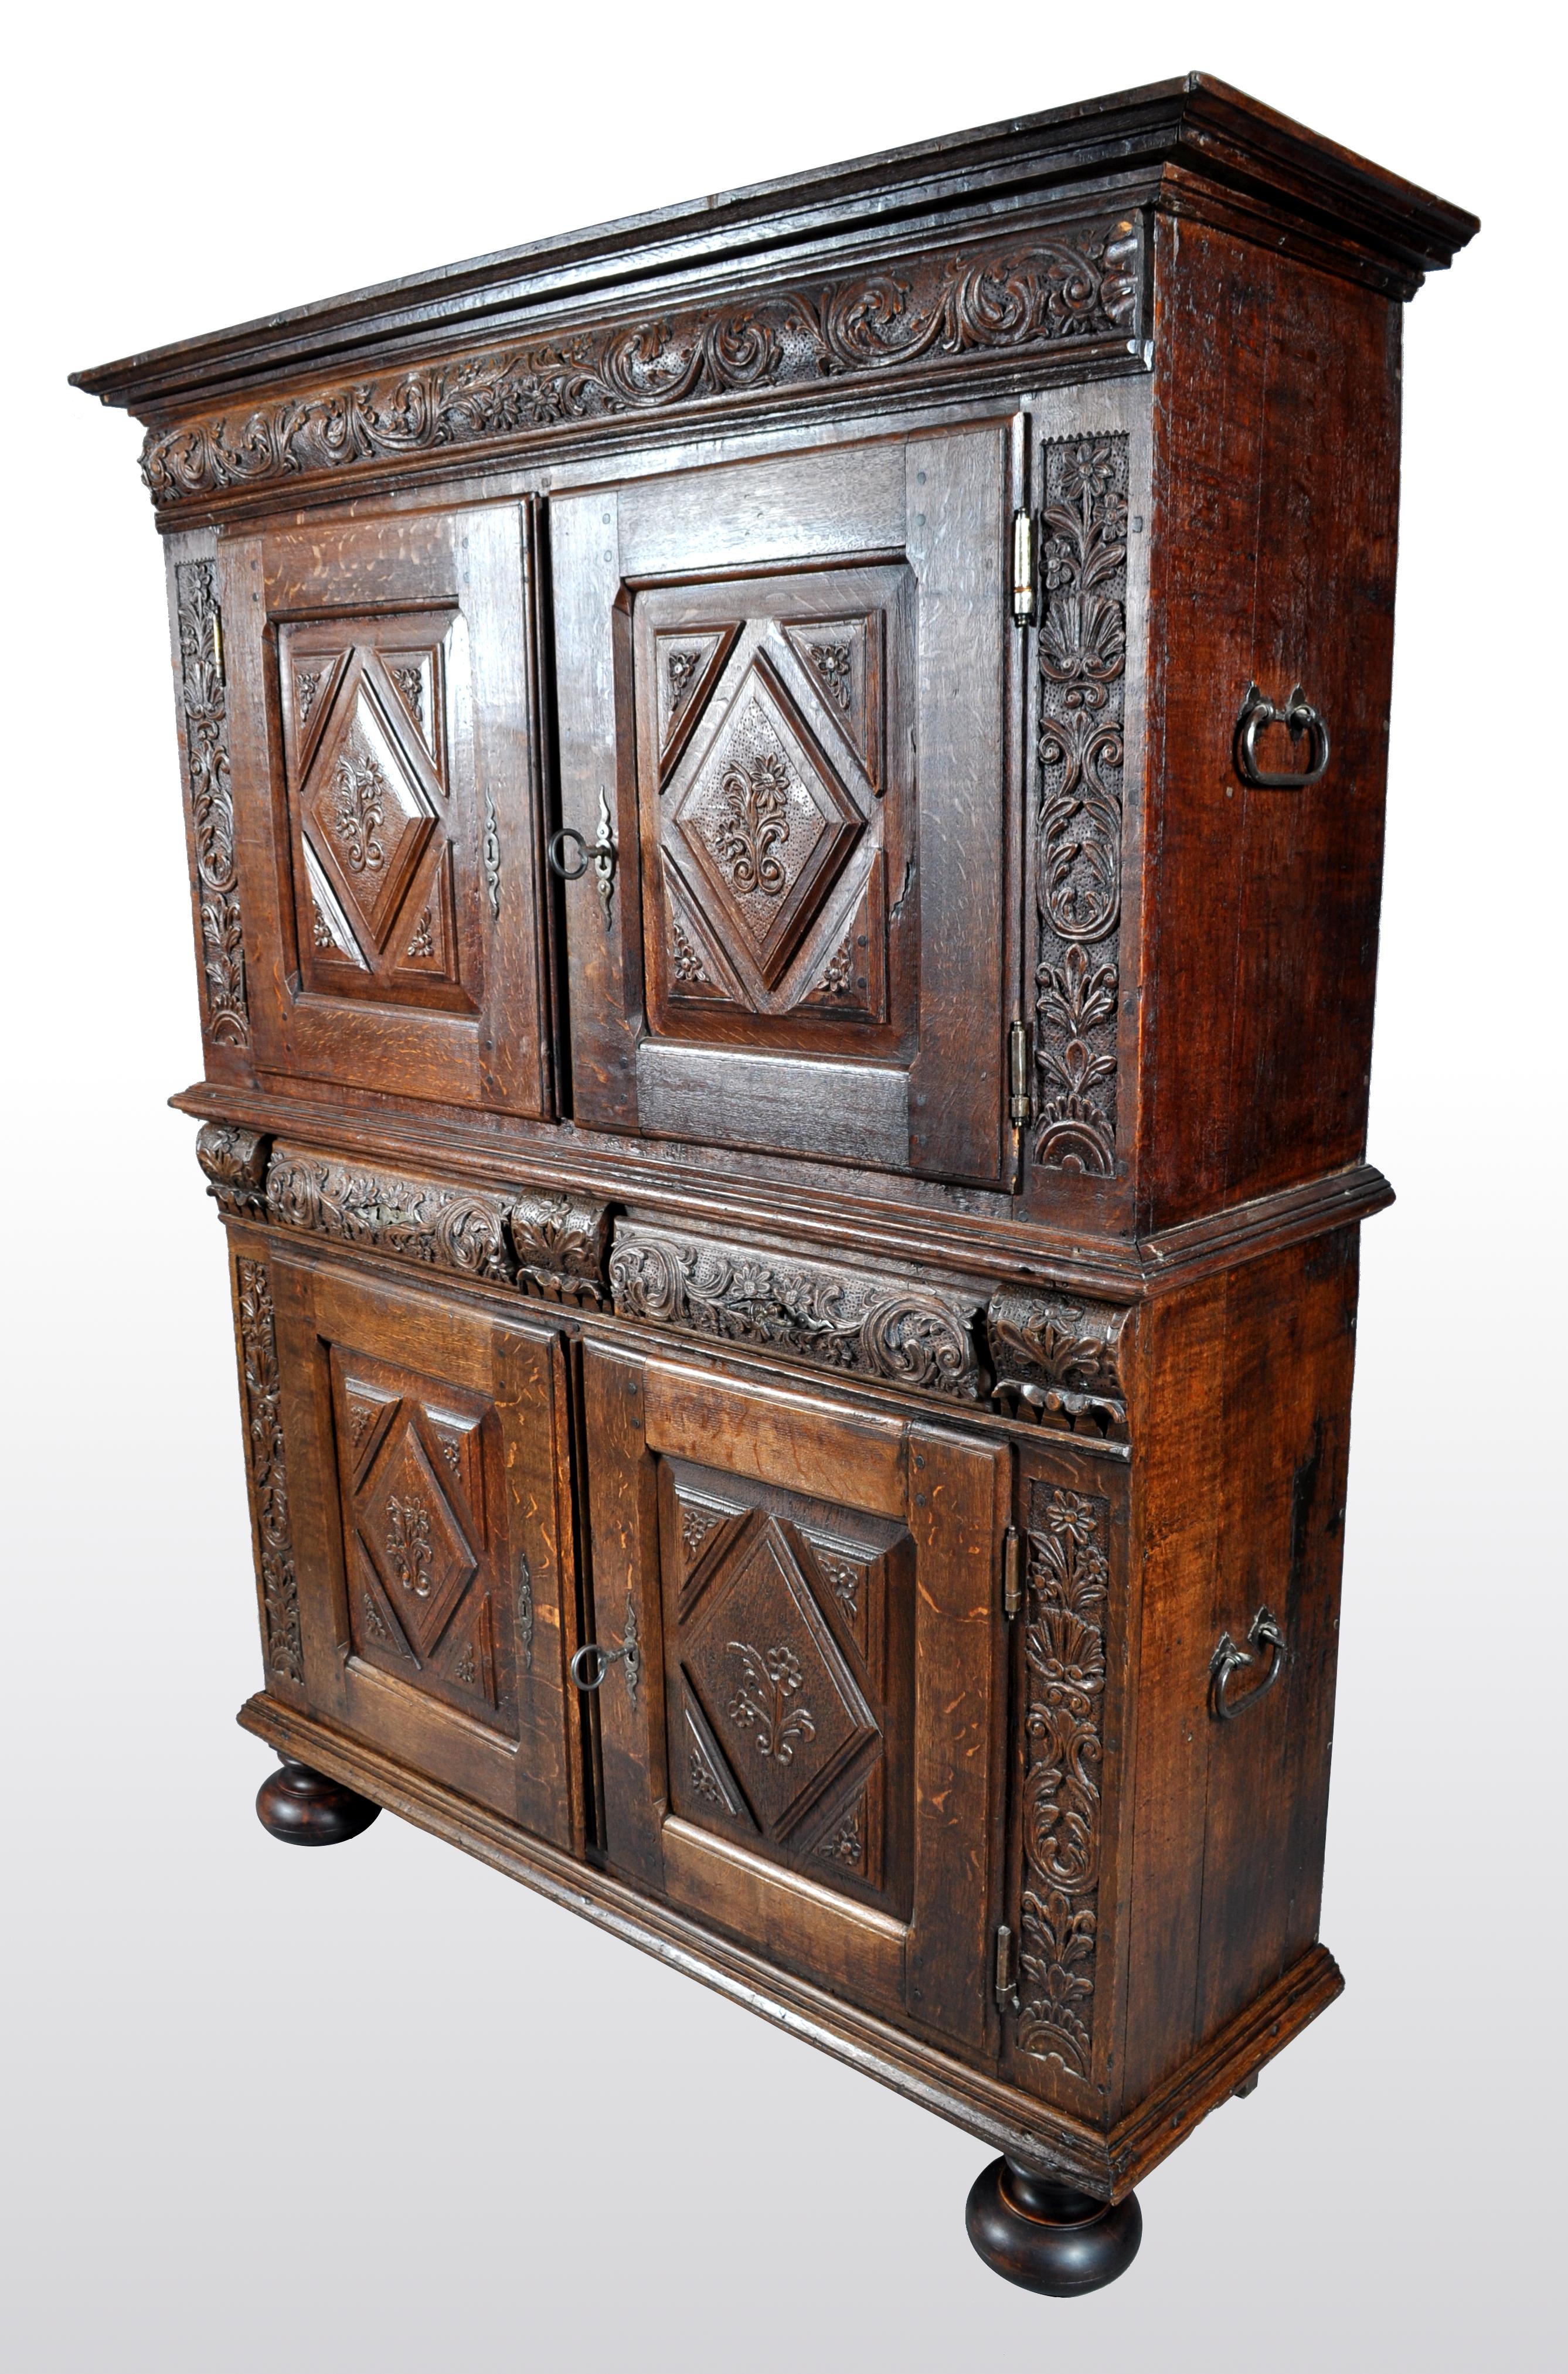 Hand-Carved Antique French Baroque Carved Oak Court Cabinet, circa 1750